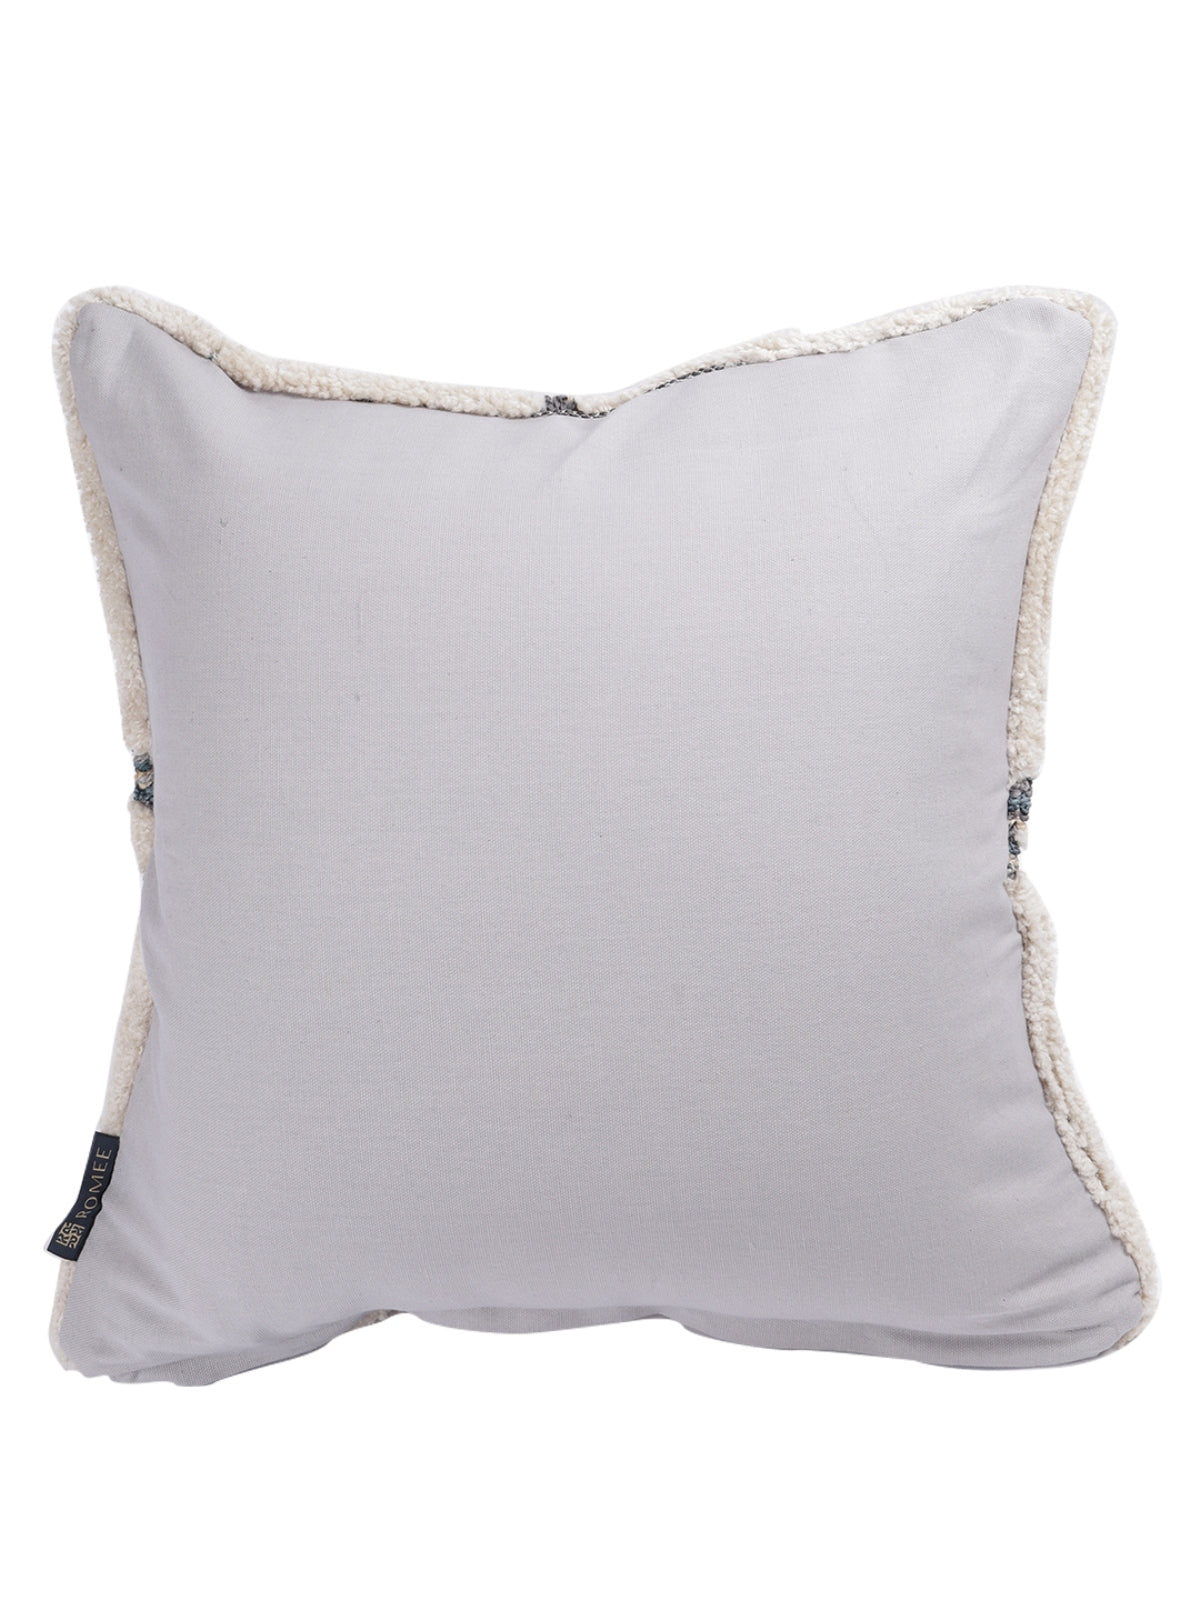 Beige & Grey Set of 2 Wool Tufted 18 Inch x 18 Inch Cushion Covers